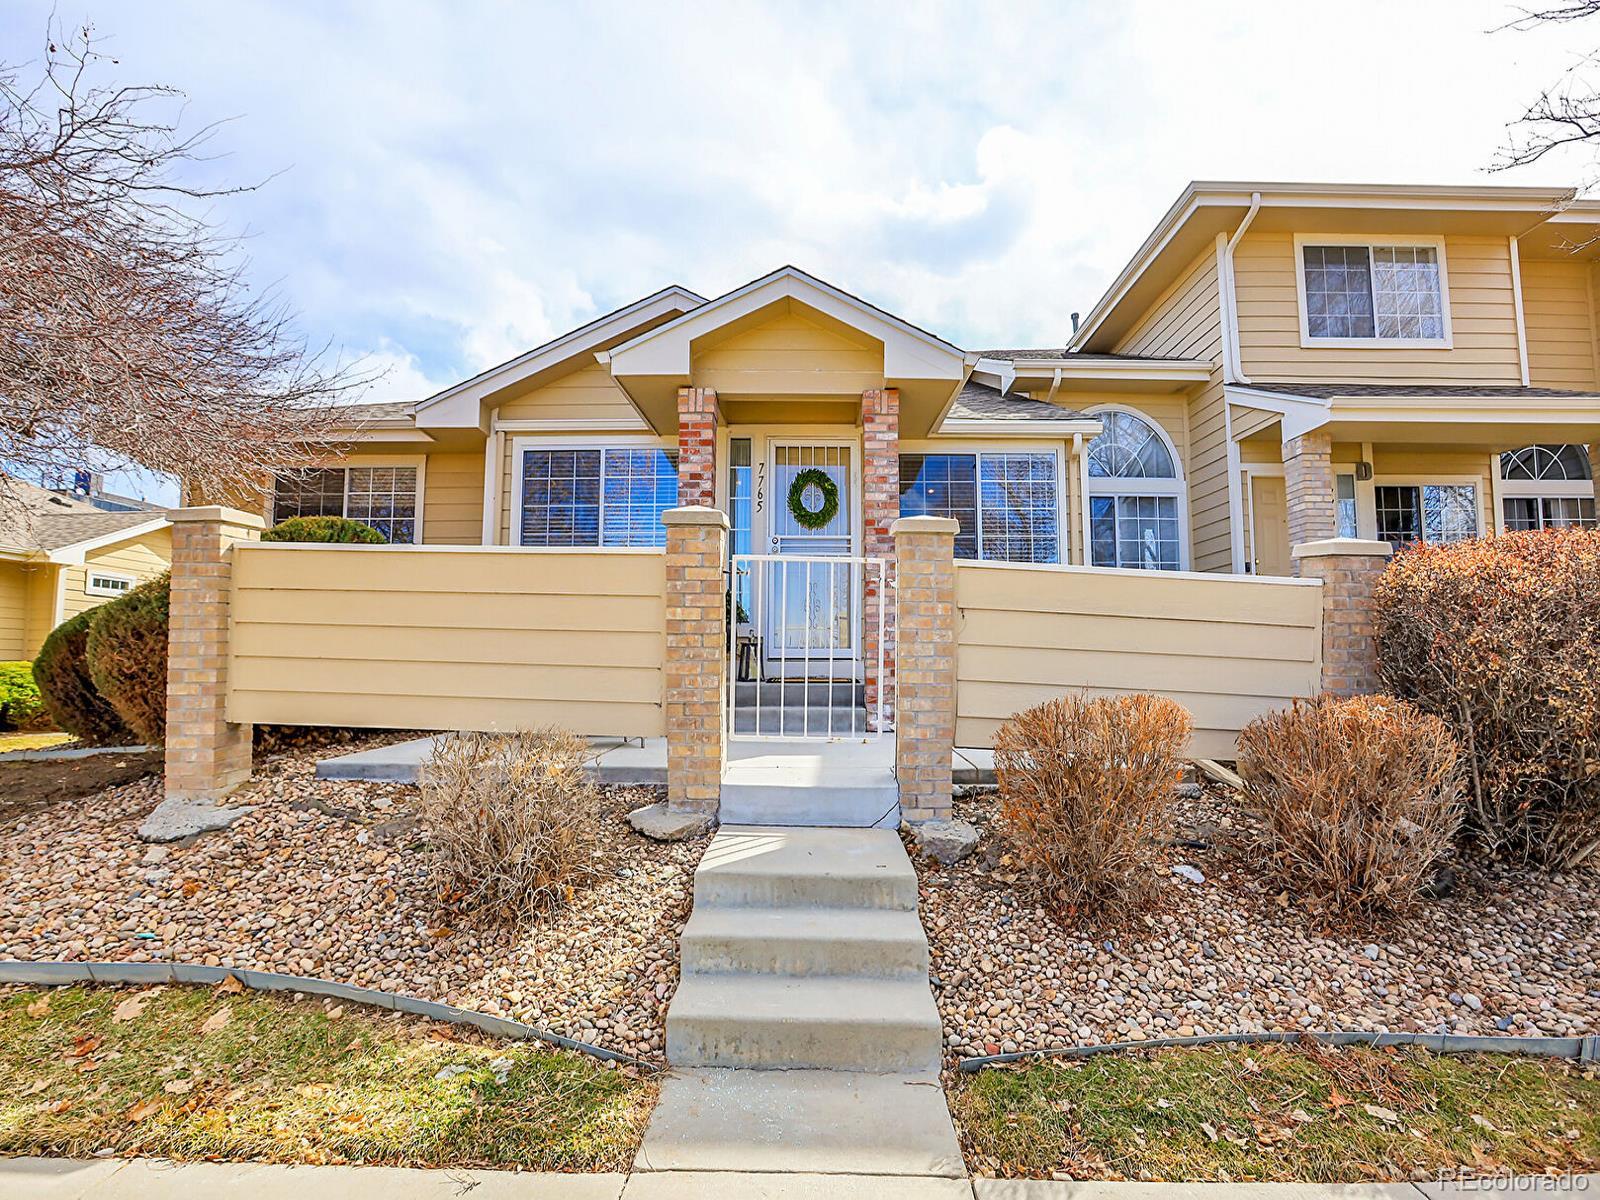 Report Image for 7765 W 90th Drive,Westminster, Colorado